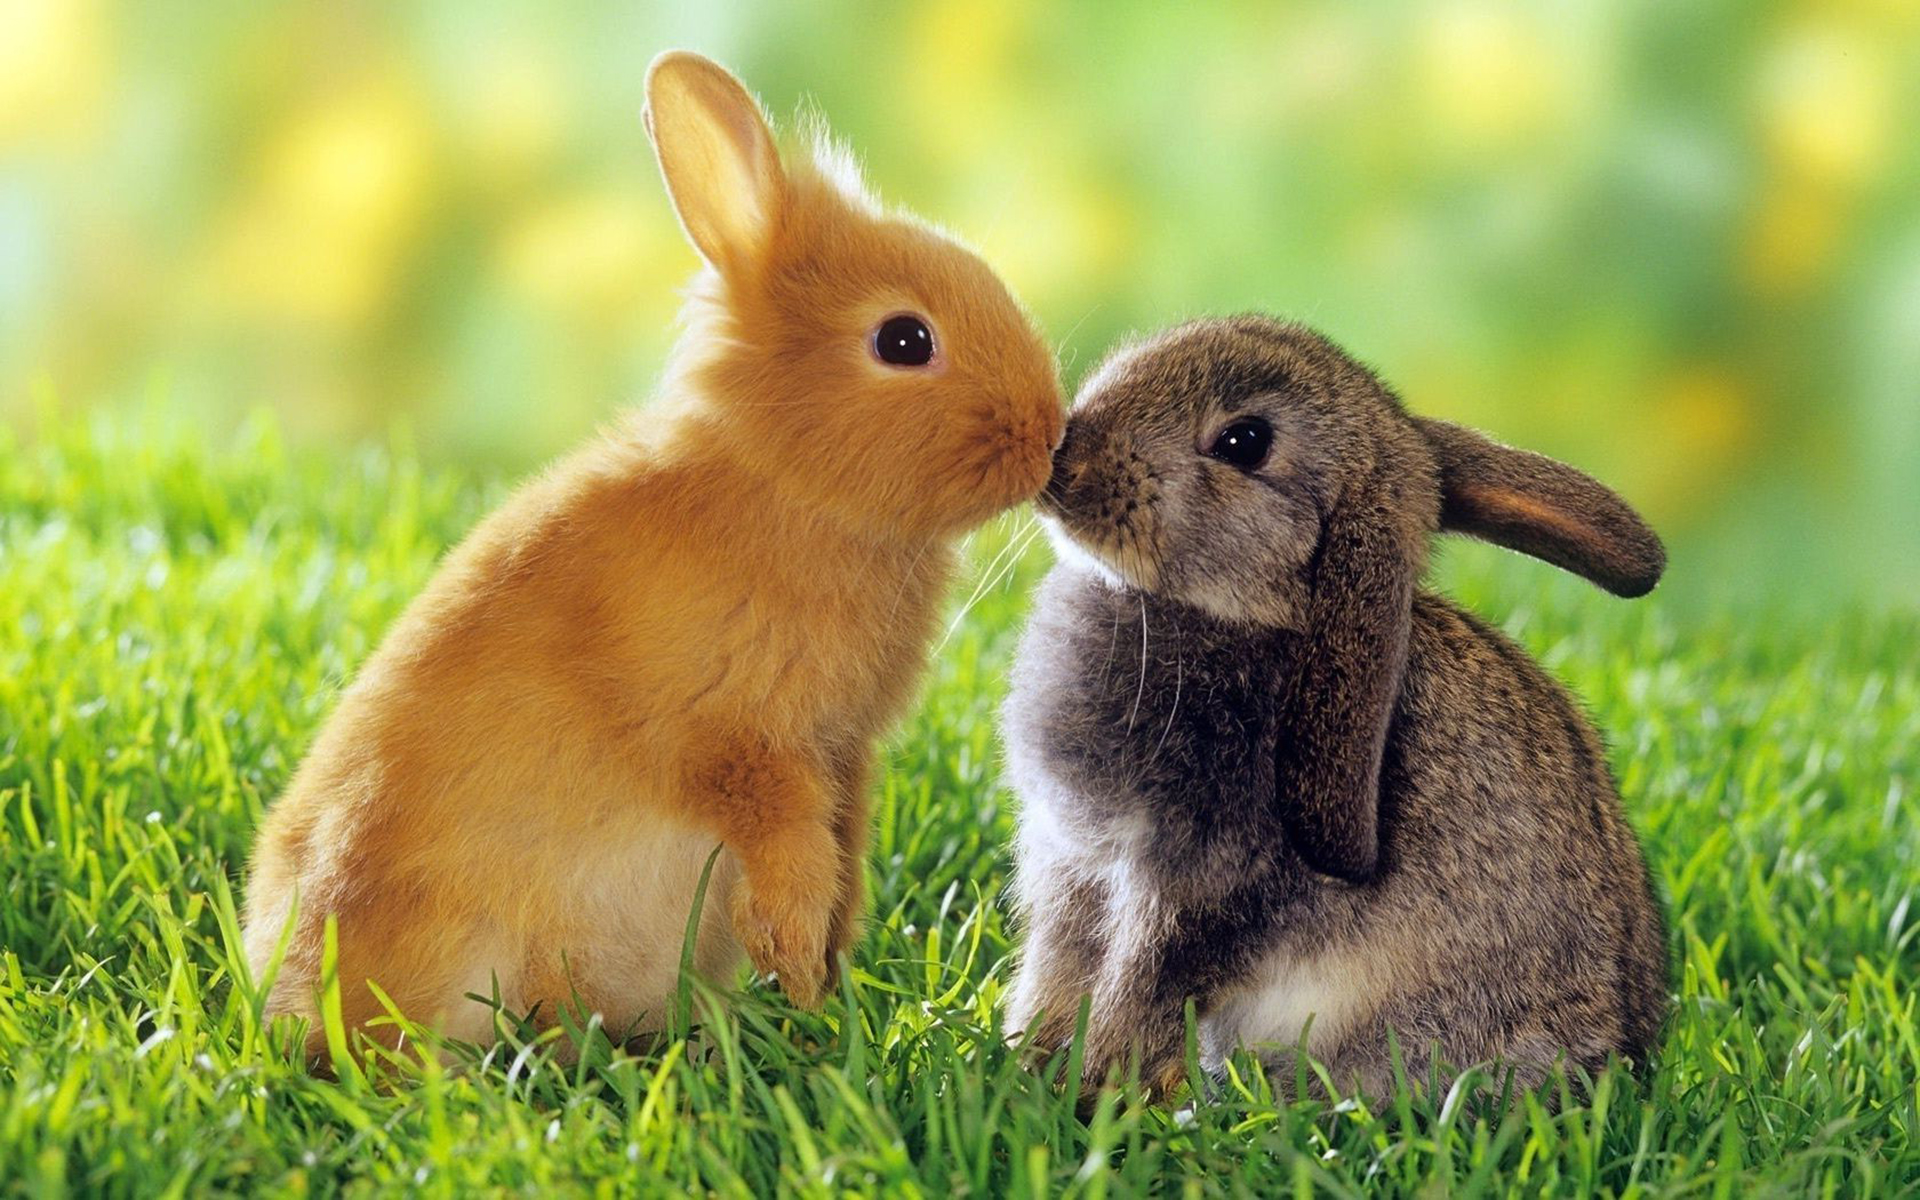 Cute bunny wallpapers for windows free download